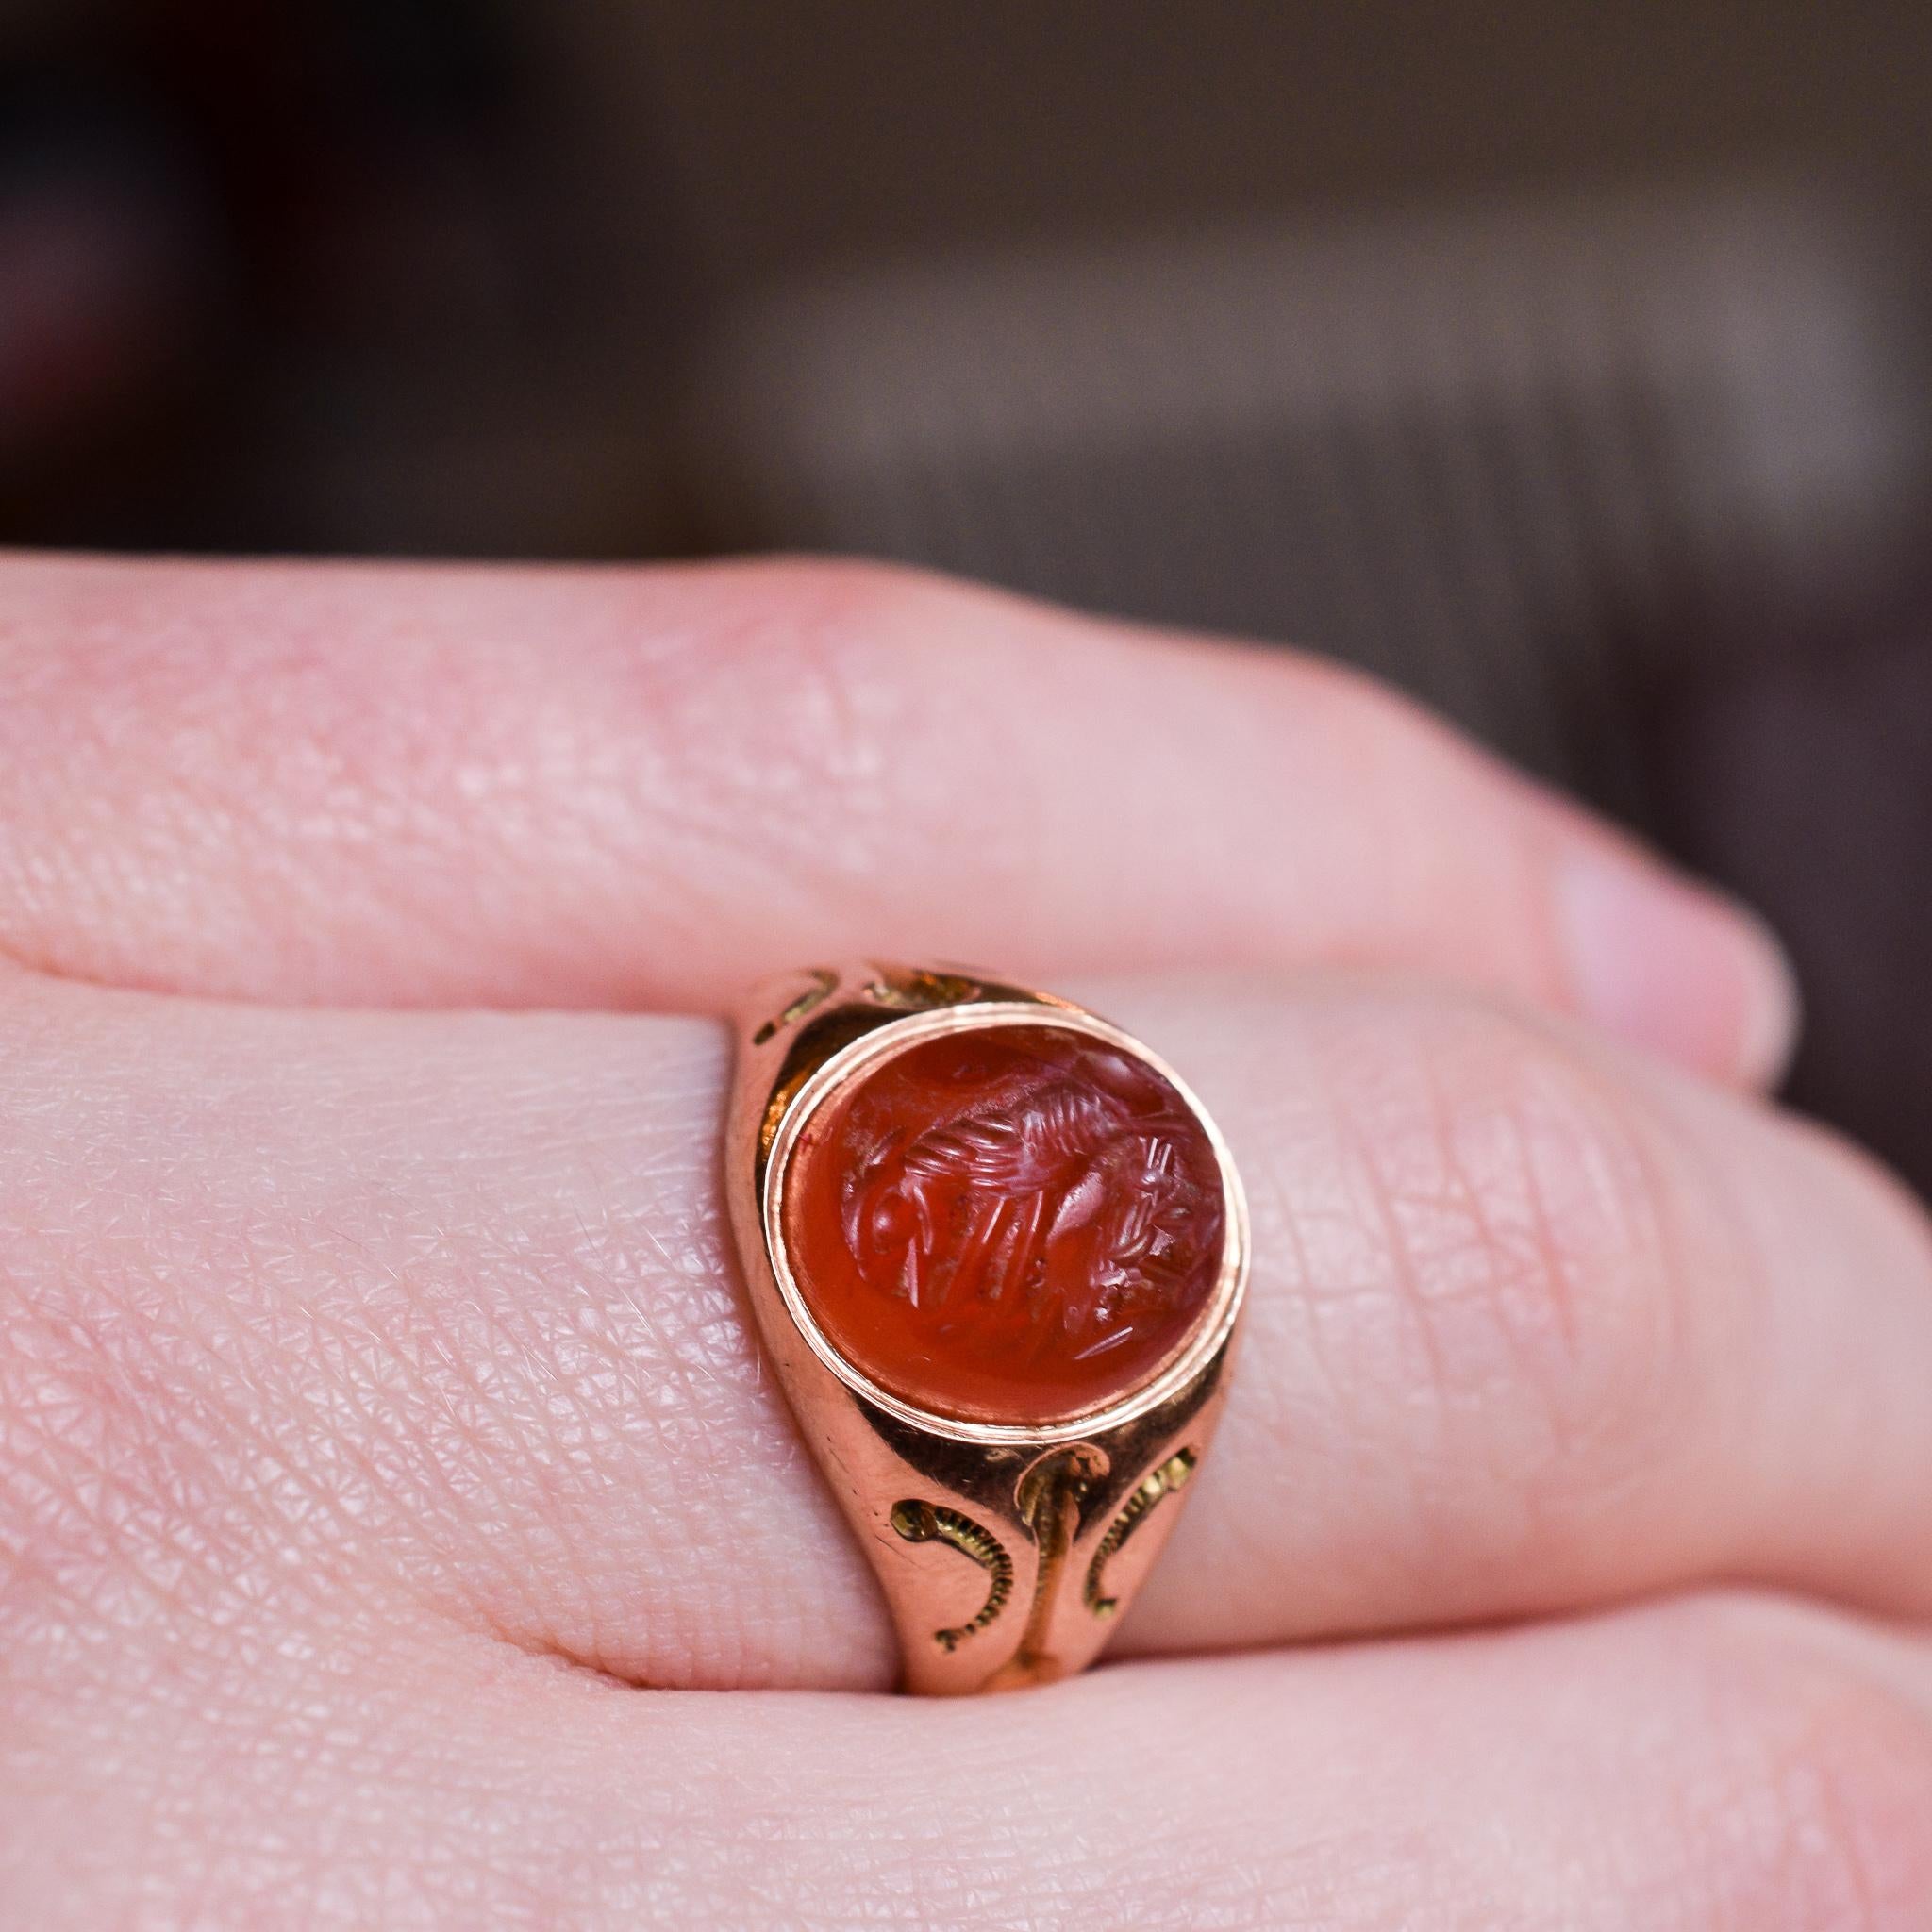 Women's or Men's Victorian Signet Ring with Roman She-Wolf Intaglio